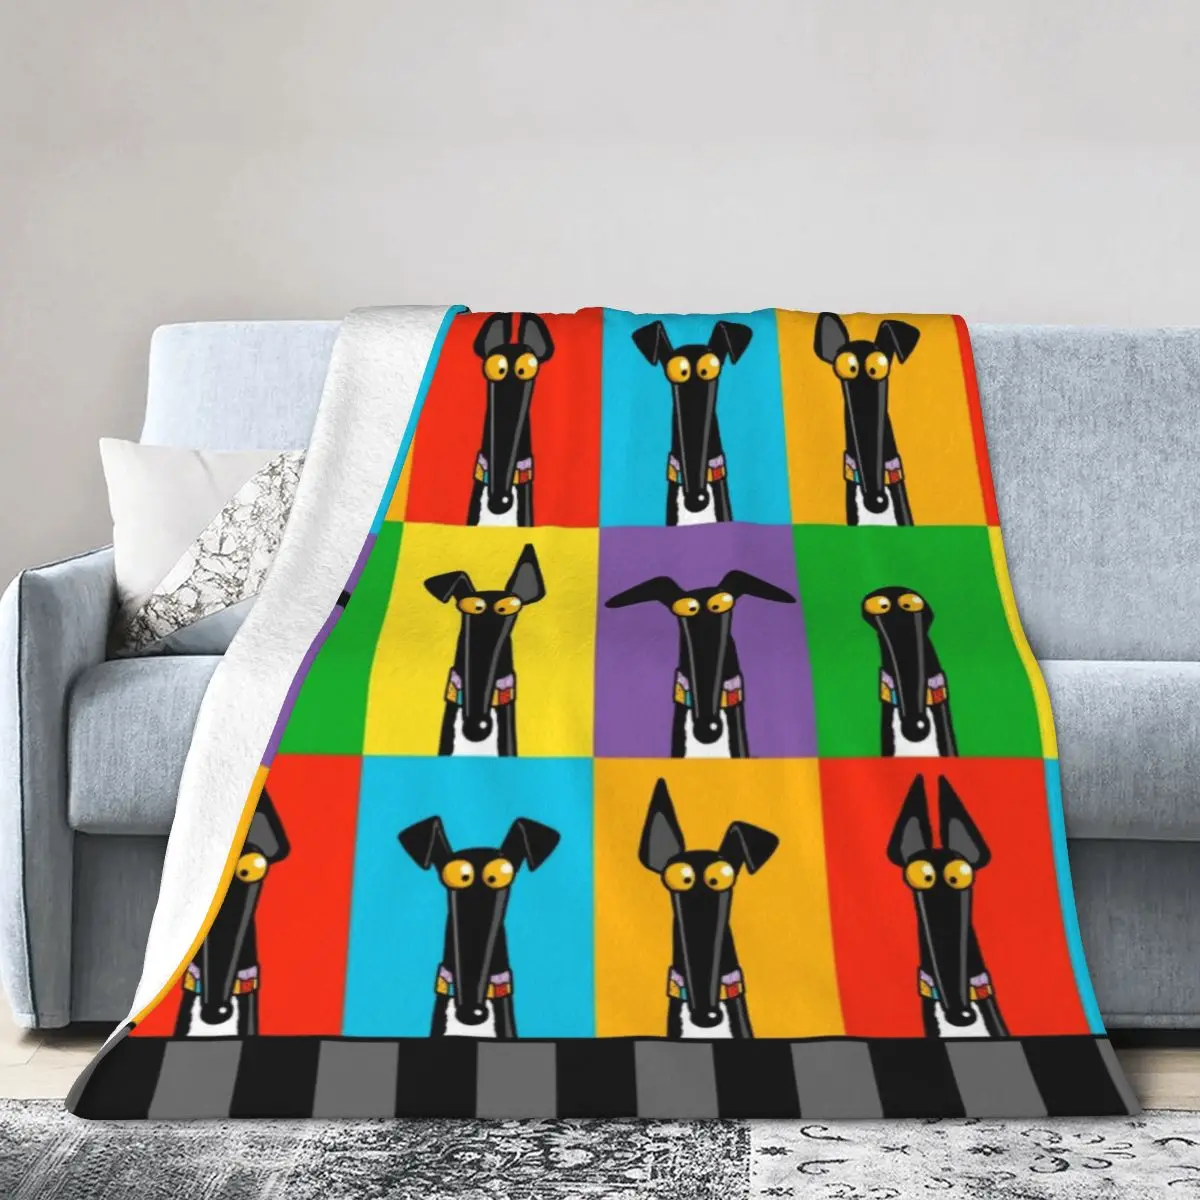 

Greyhound Semaphore With Border Blankets Soft Warm Flannel Throw Blanket Plush for Bed Living room Picnic Travel Home Couch